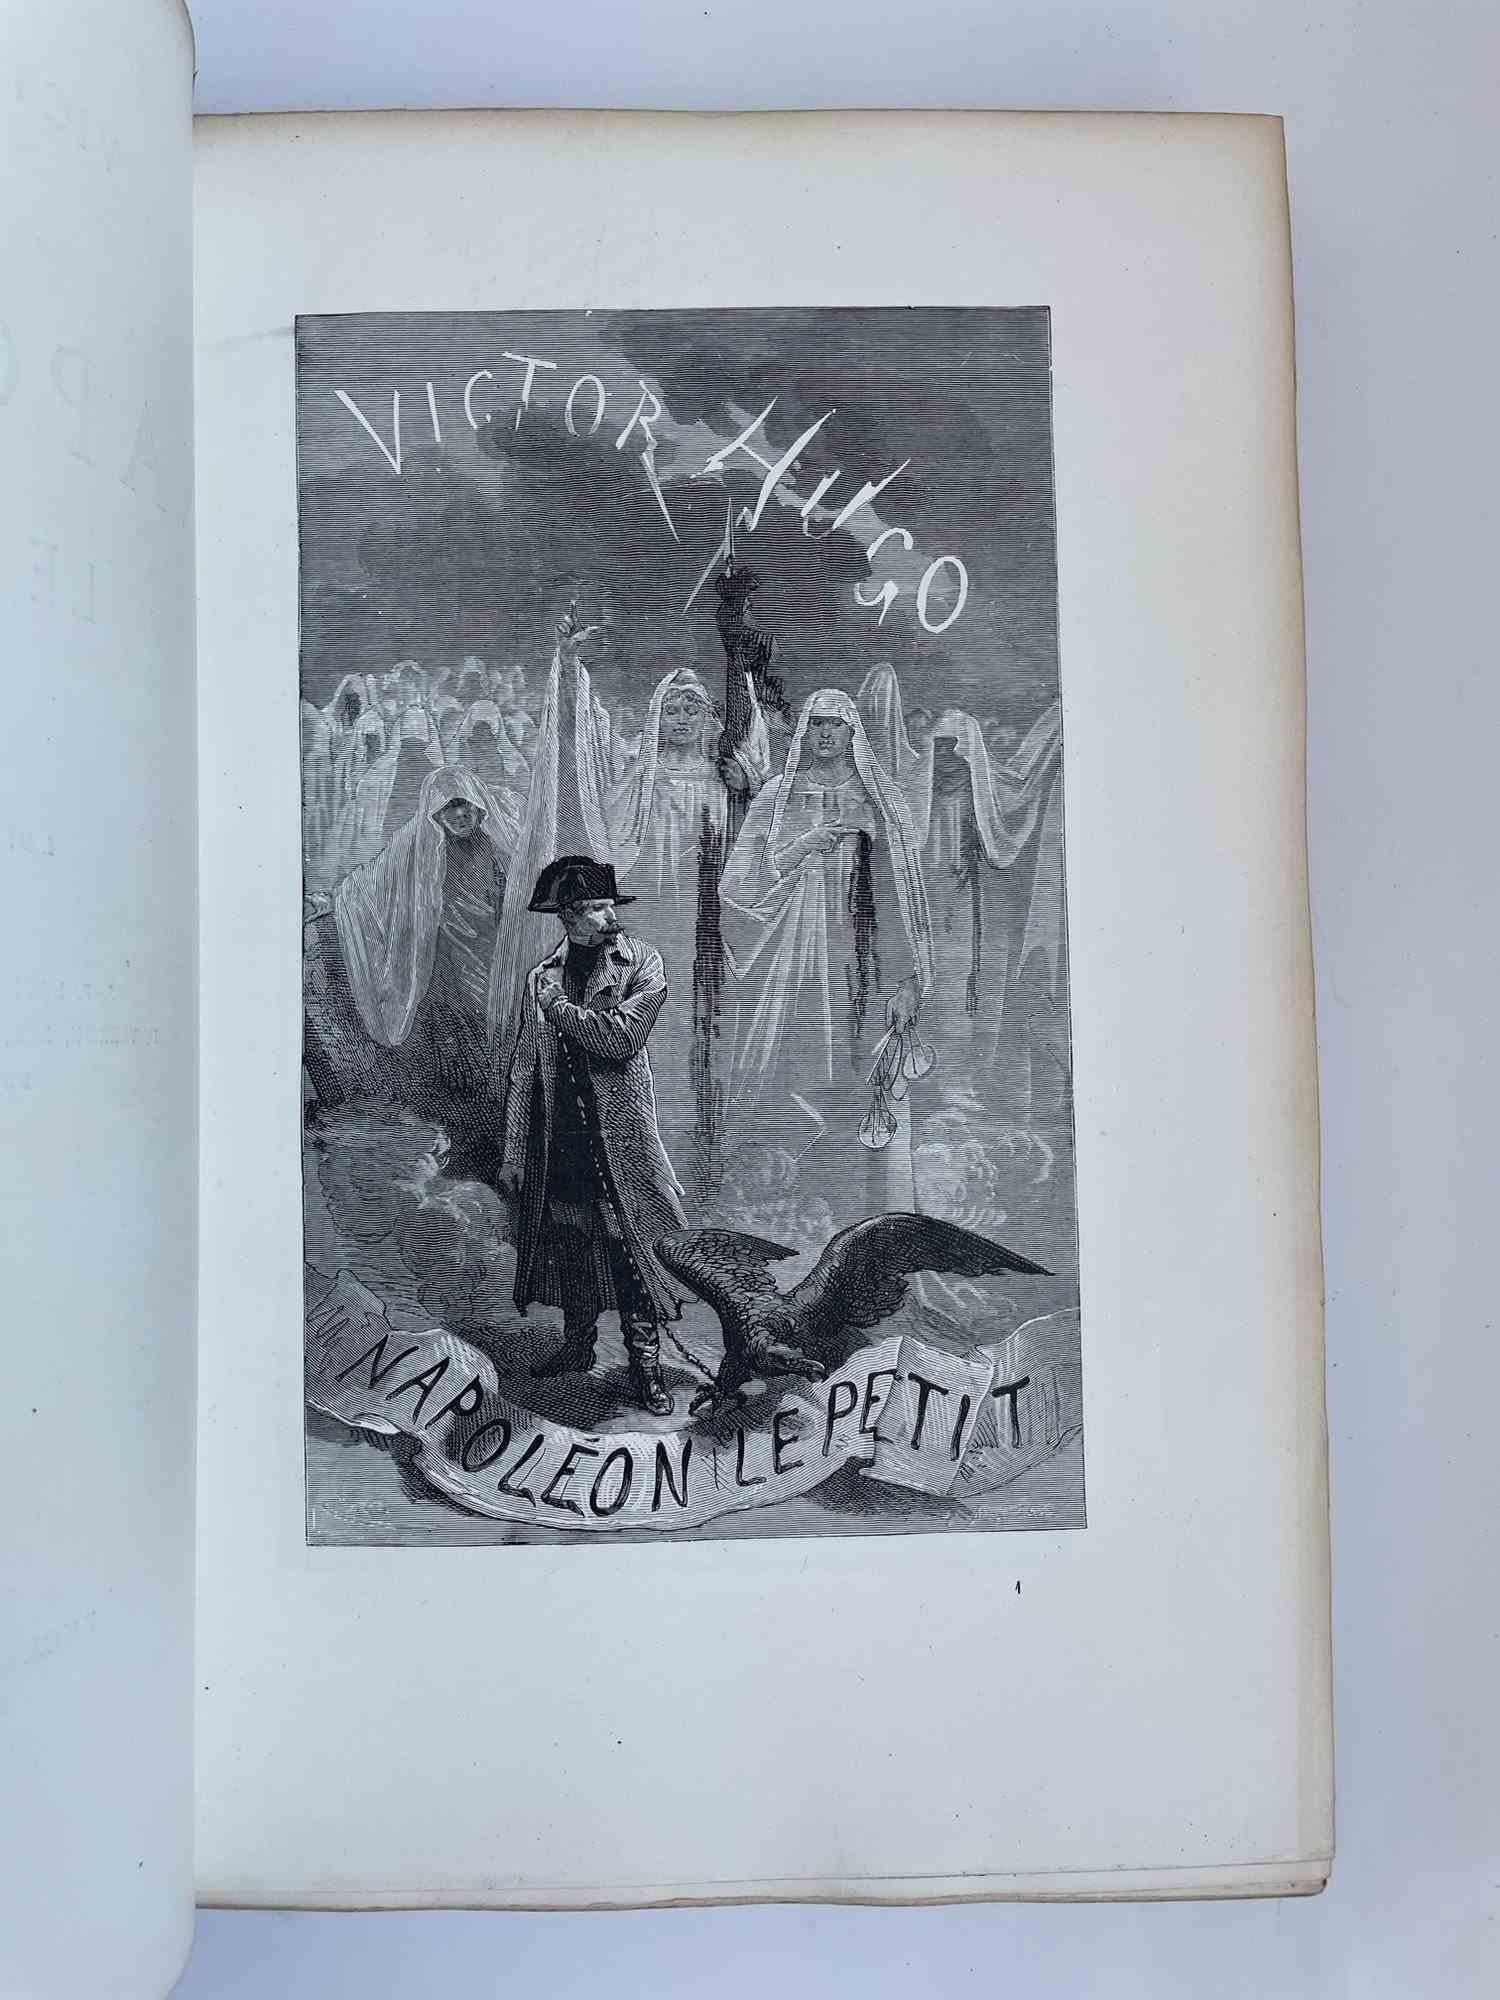 Napoléon le petit is a rare book by Victor Hugo published in 1879

Edited by Eugène Hugues – Paris

Original “De luxe” illustrated edition by Vierge Daniel – Chifflart François – Laurens Jean-Paul and others

“Tirage de tête” of 50 copies (this is